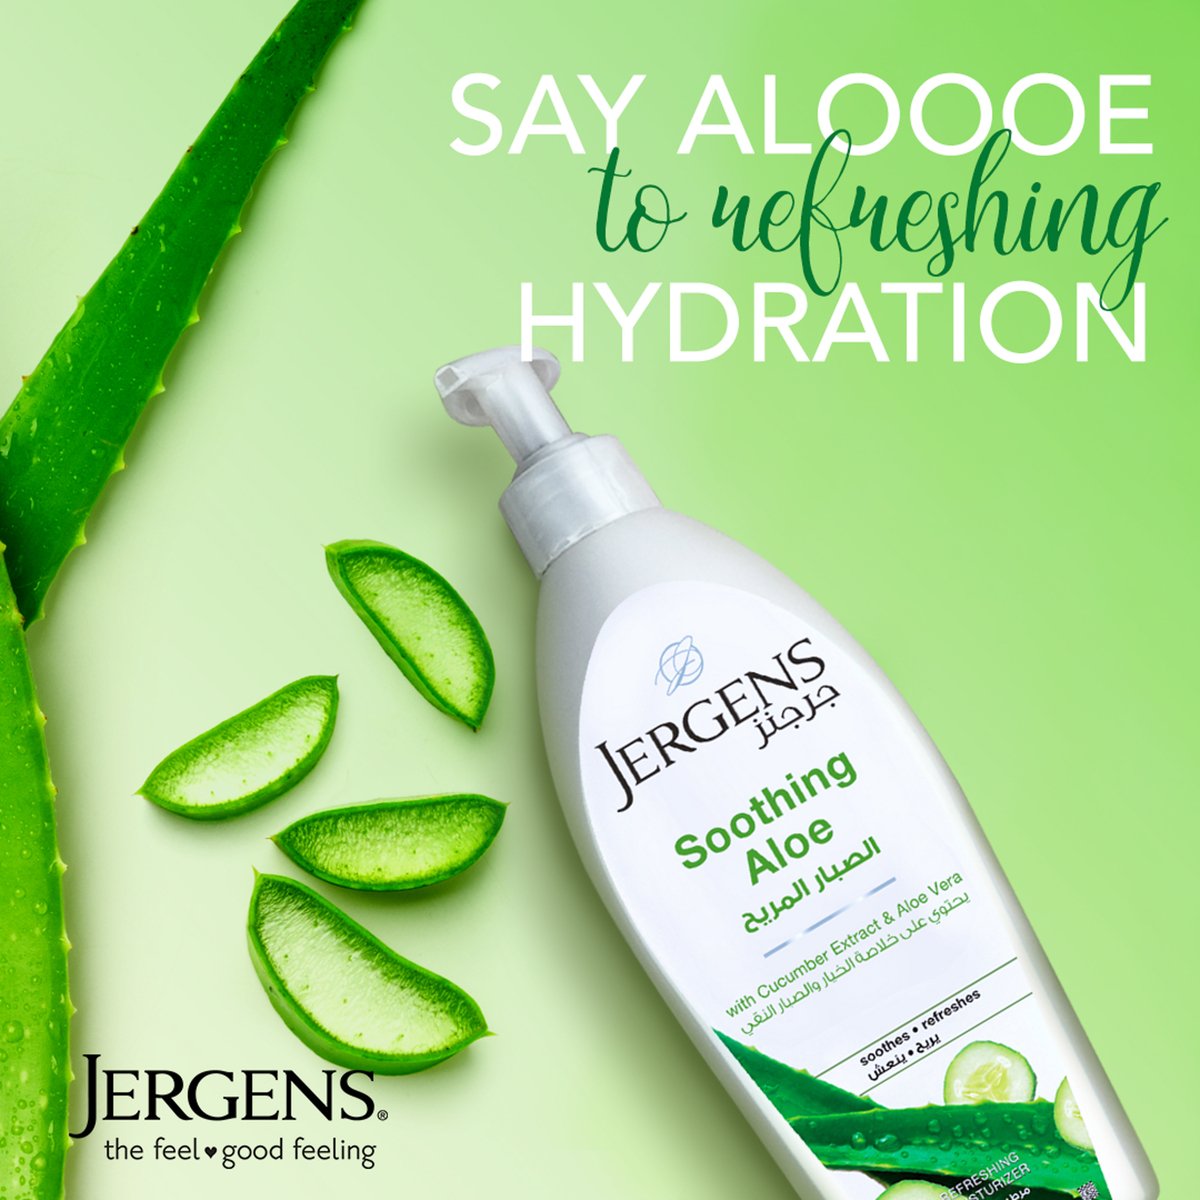 Jergens Body Lotion Soothing Aloe 600 ml